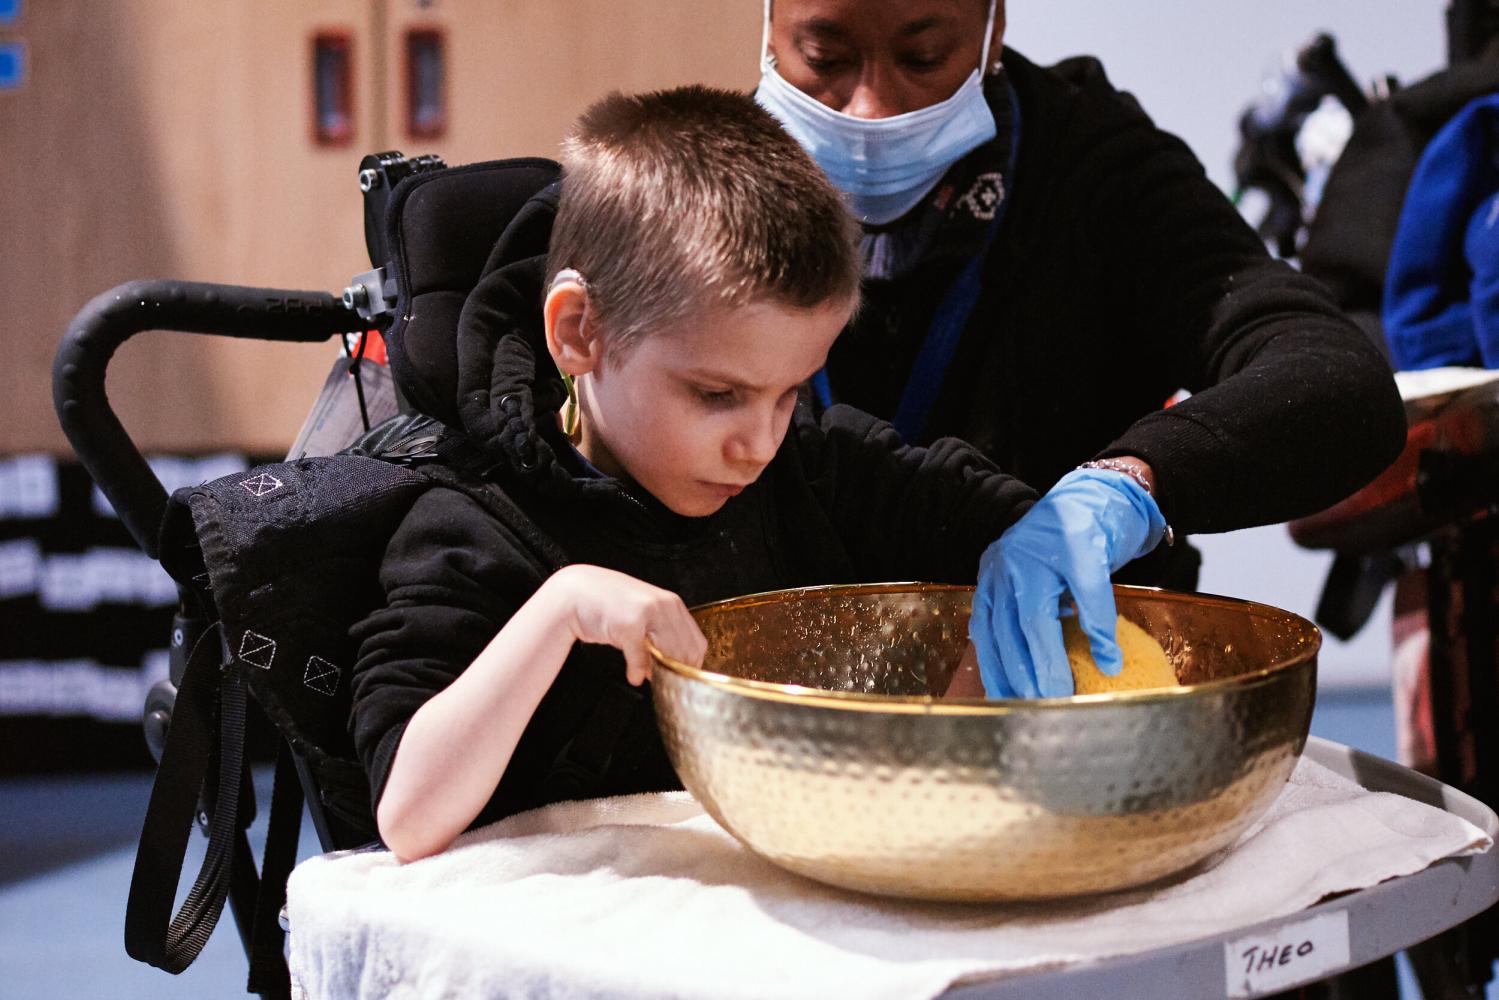 Young person in a wheelchair looks at their supporting adults hand as they squeeze a sponge in a gold bowl filled with water